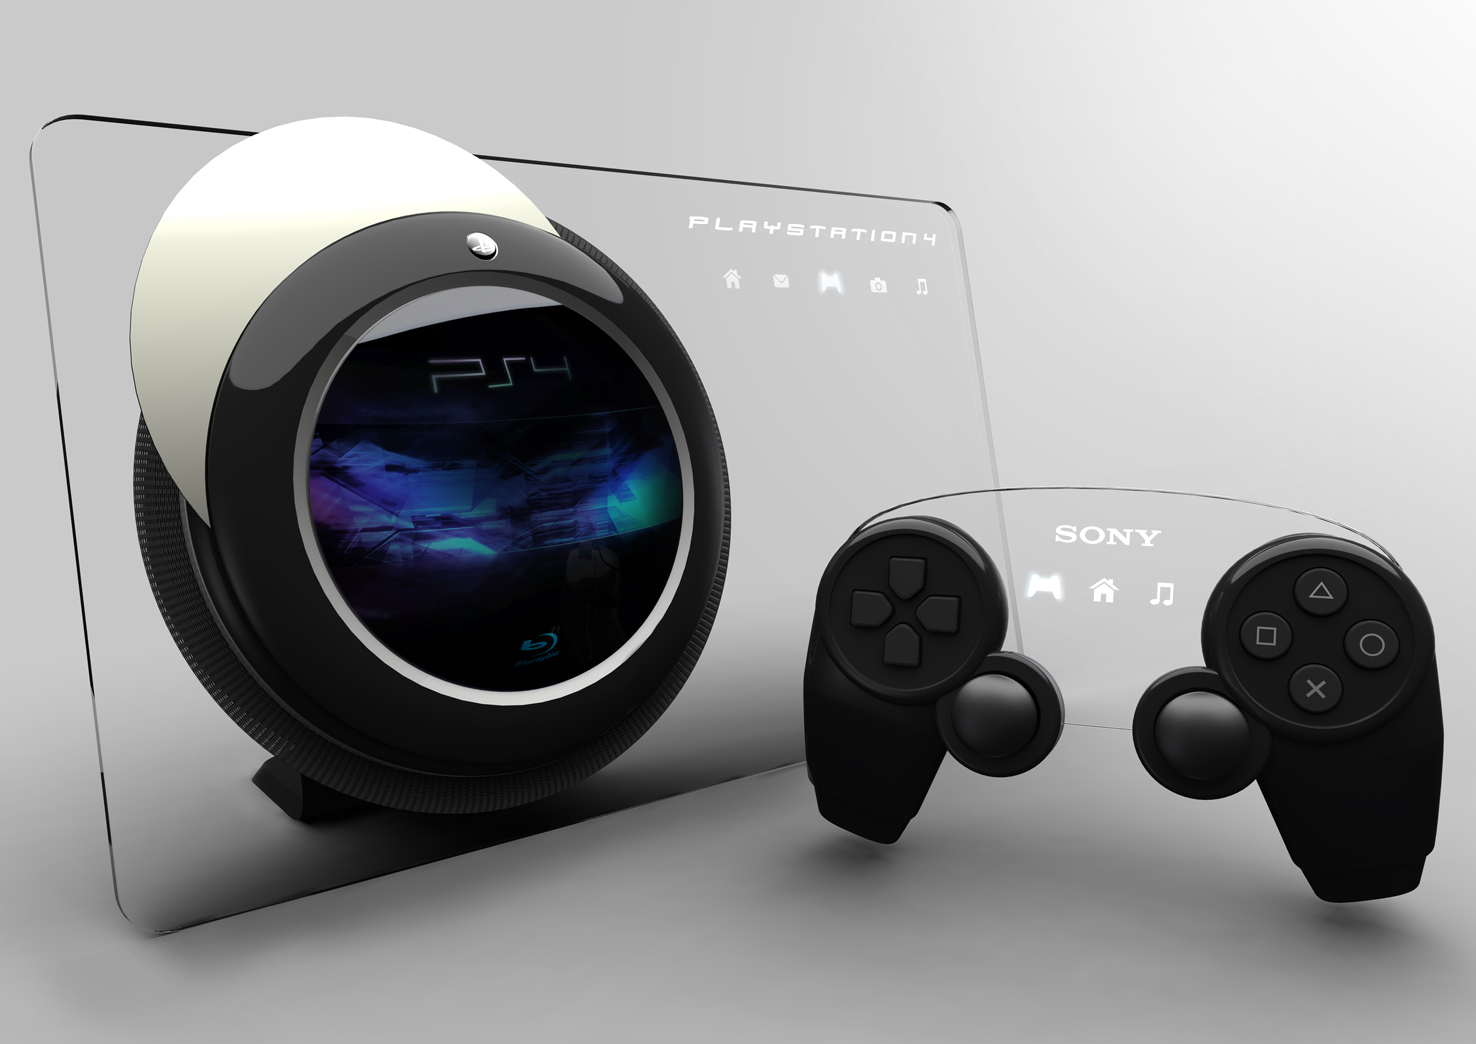 A concept design of the ps4